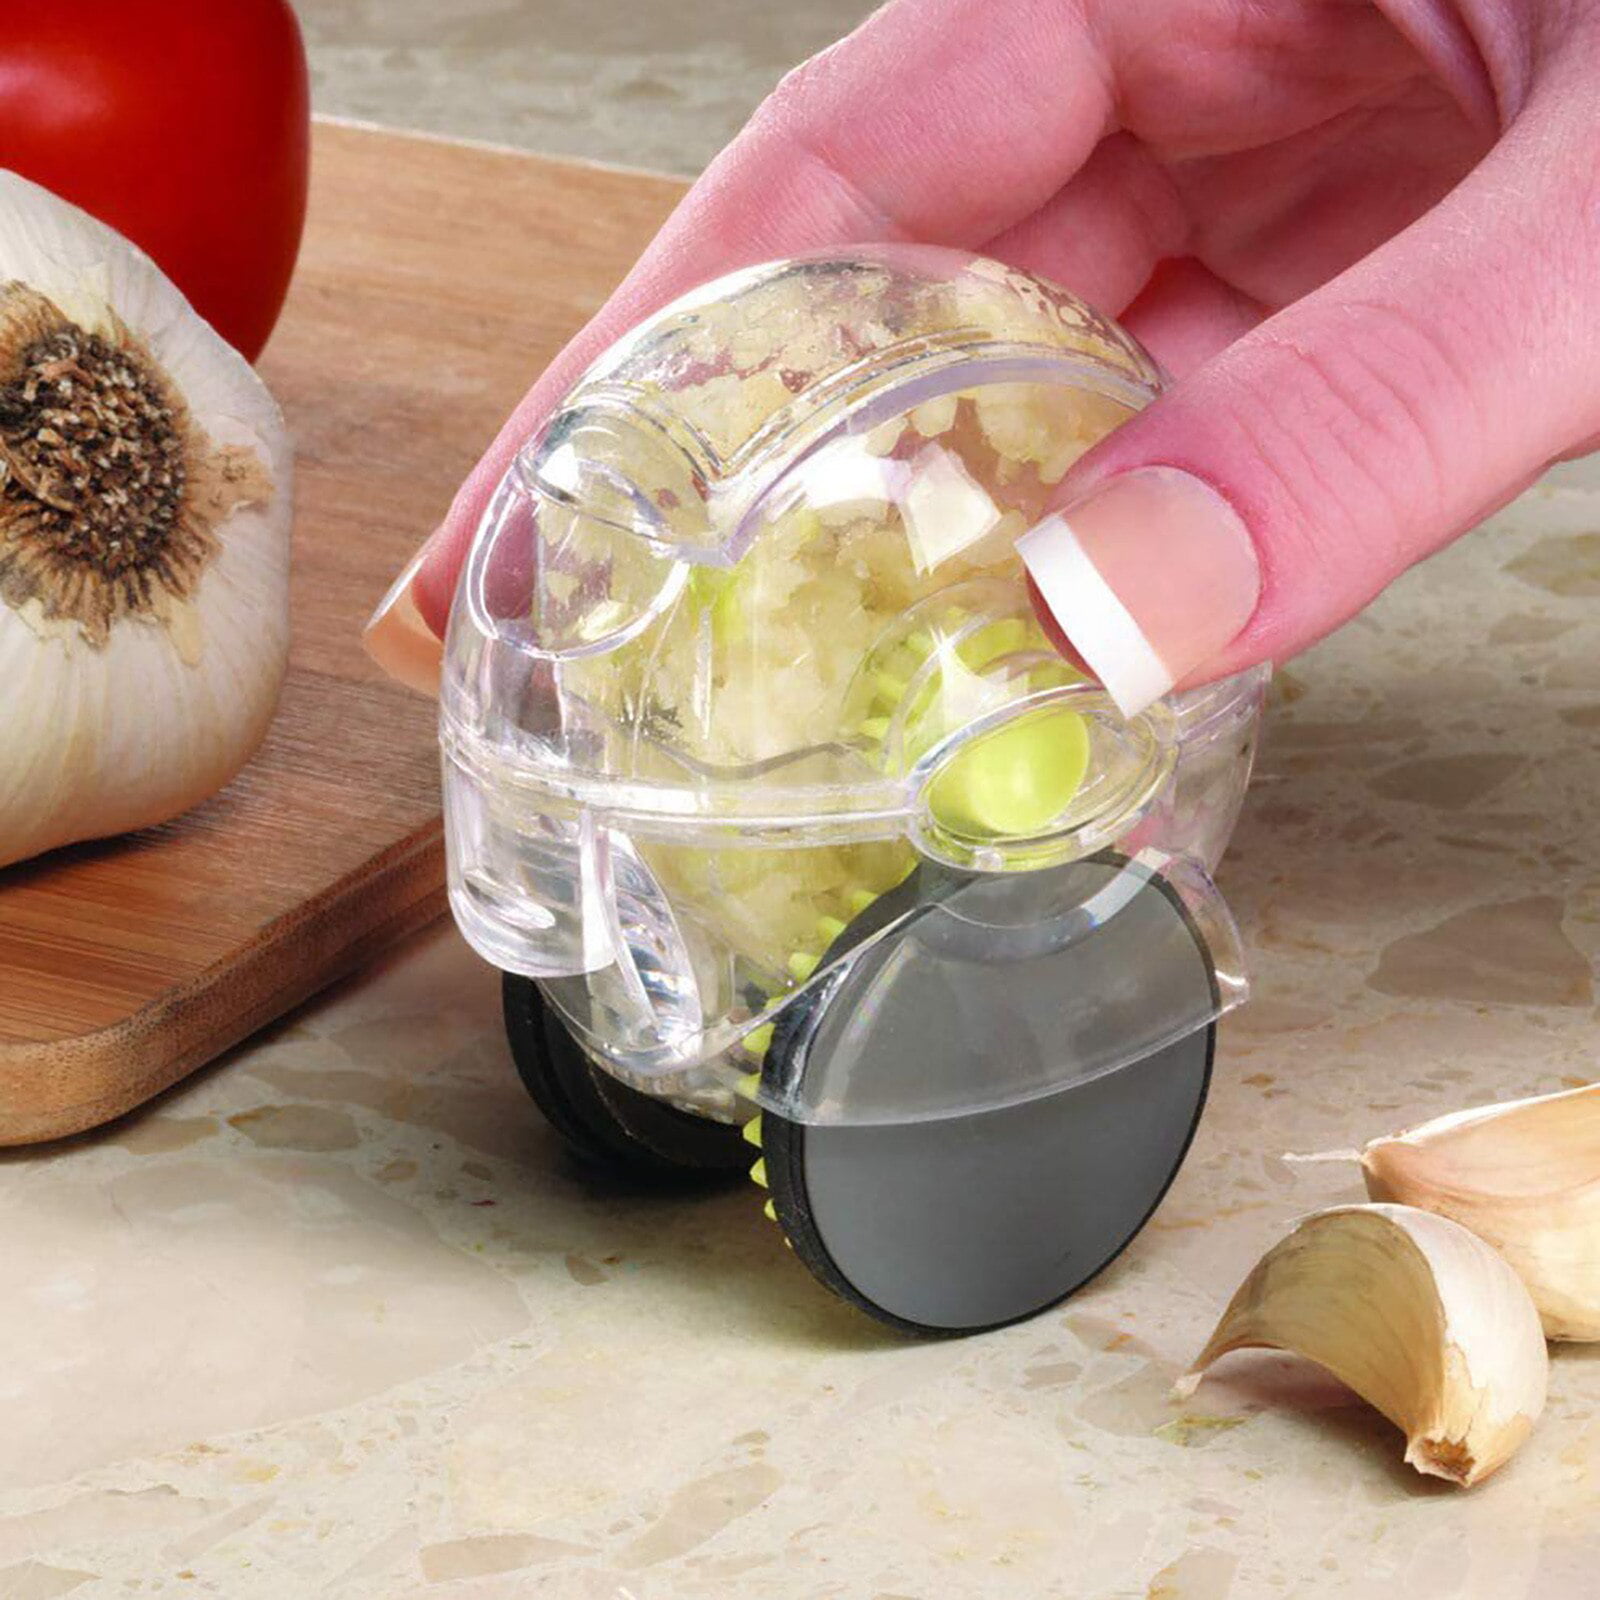  Nspired Living Garlic Mincer, Rolling Garlic Chopper, Garlic  Roller, Garlic Peeler, Garlic Crusher, Chef Kitchen Tools, Easy to Clean,  Just Rinse Green: Home & Kitchen